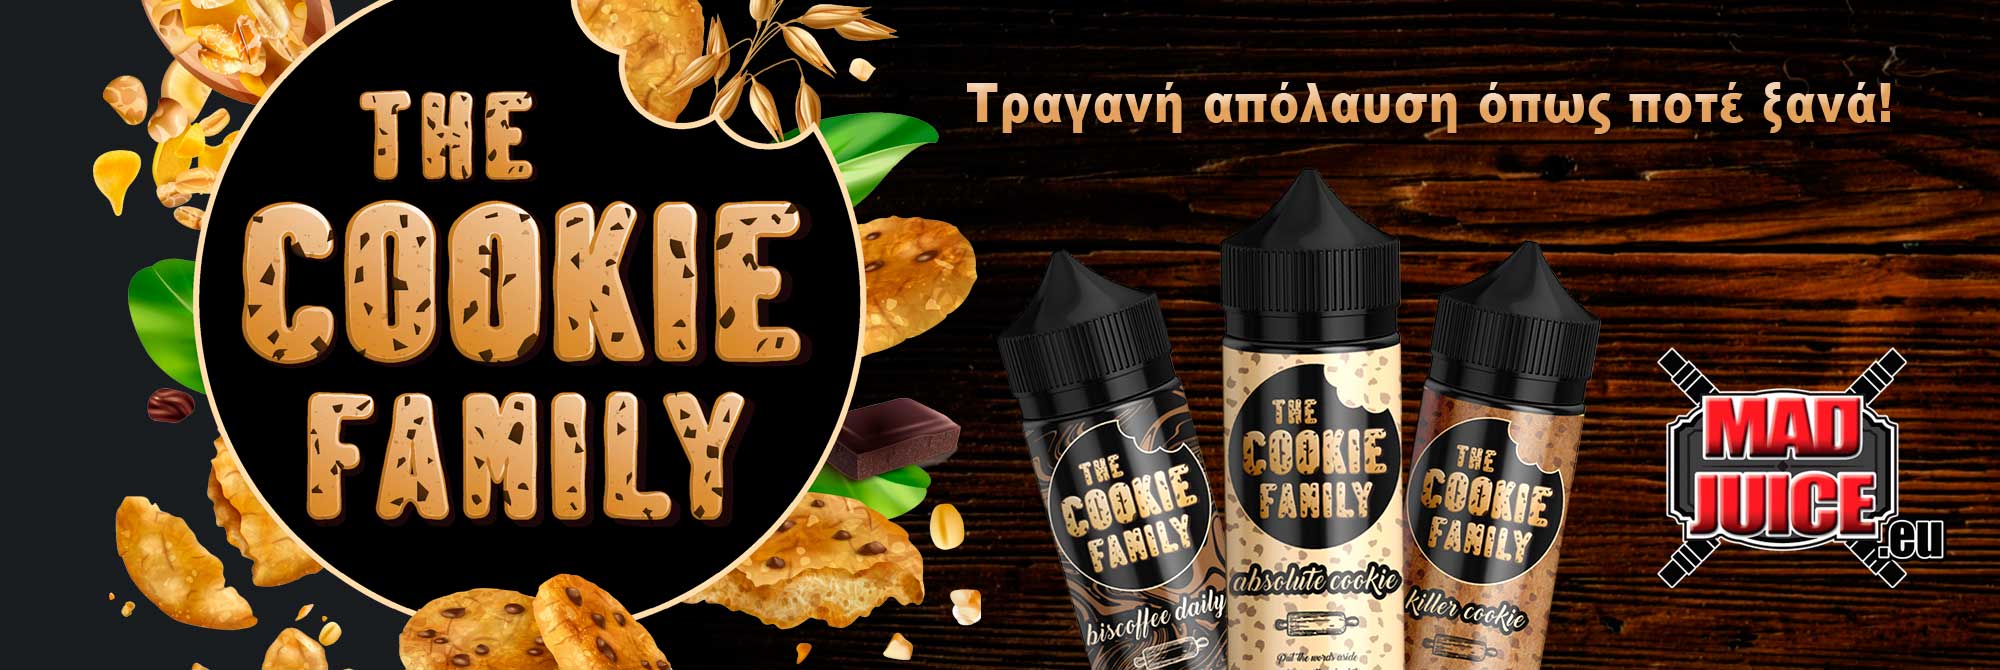 BANNER THE COOKIE FAMILY 2000x670px